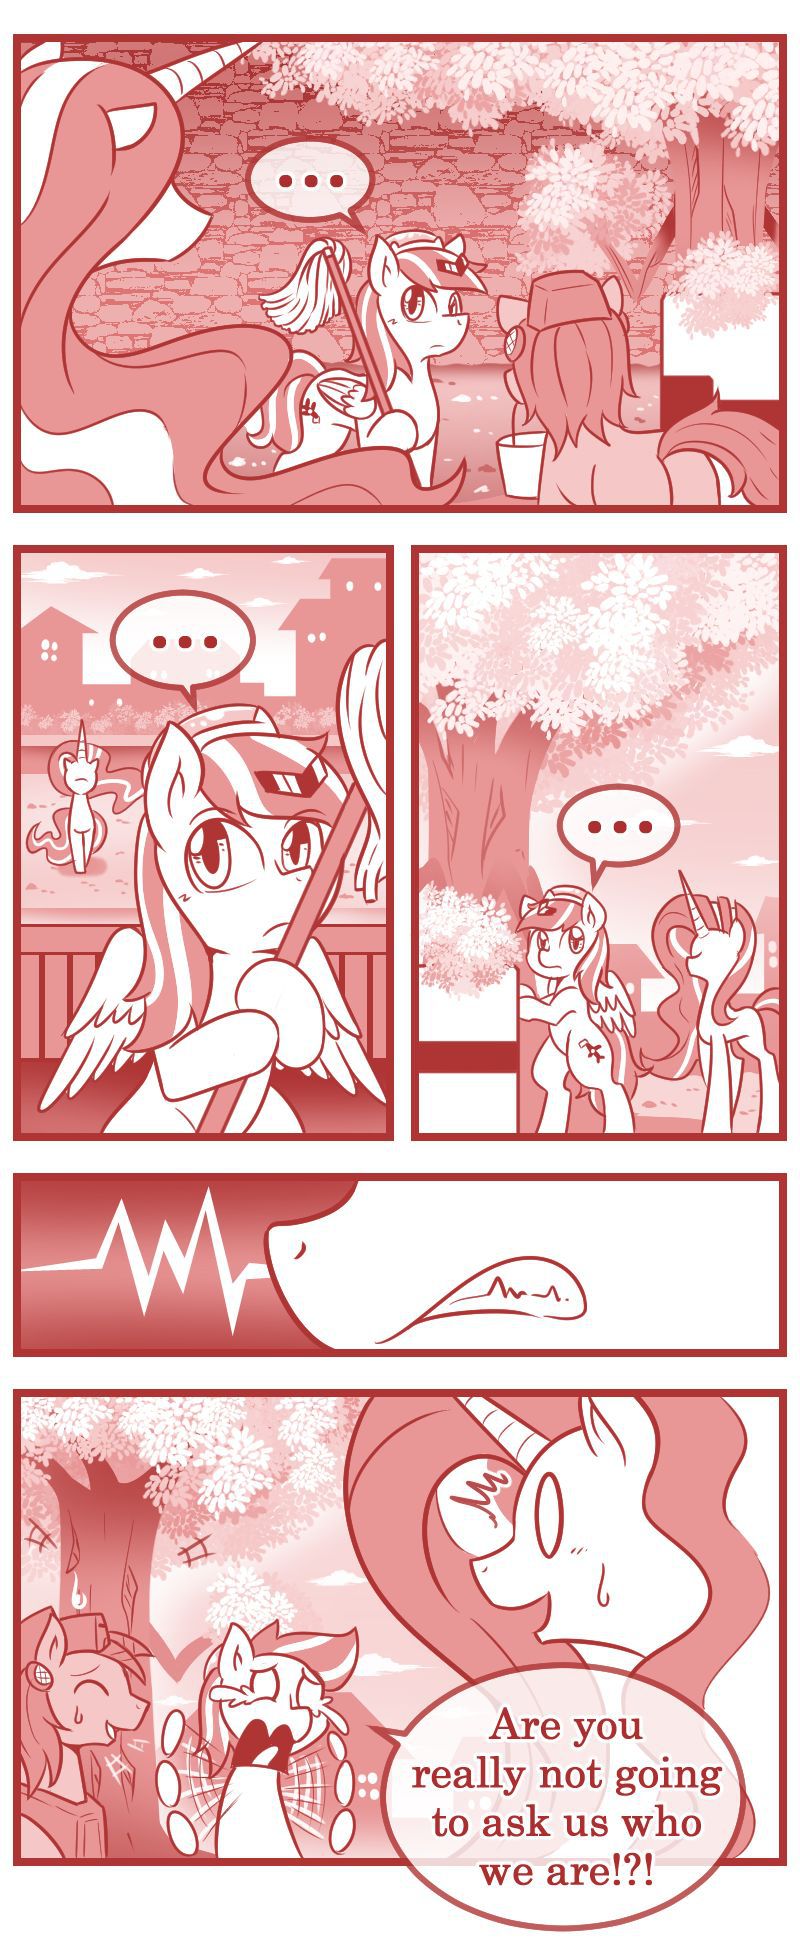 [Vavacung] Chaos Future (My Little Pony: Friendship is Magic) [Ongoing] 92